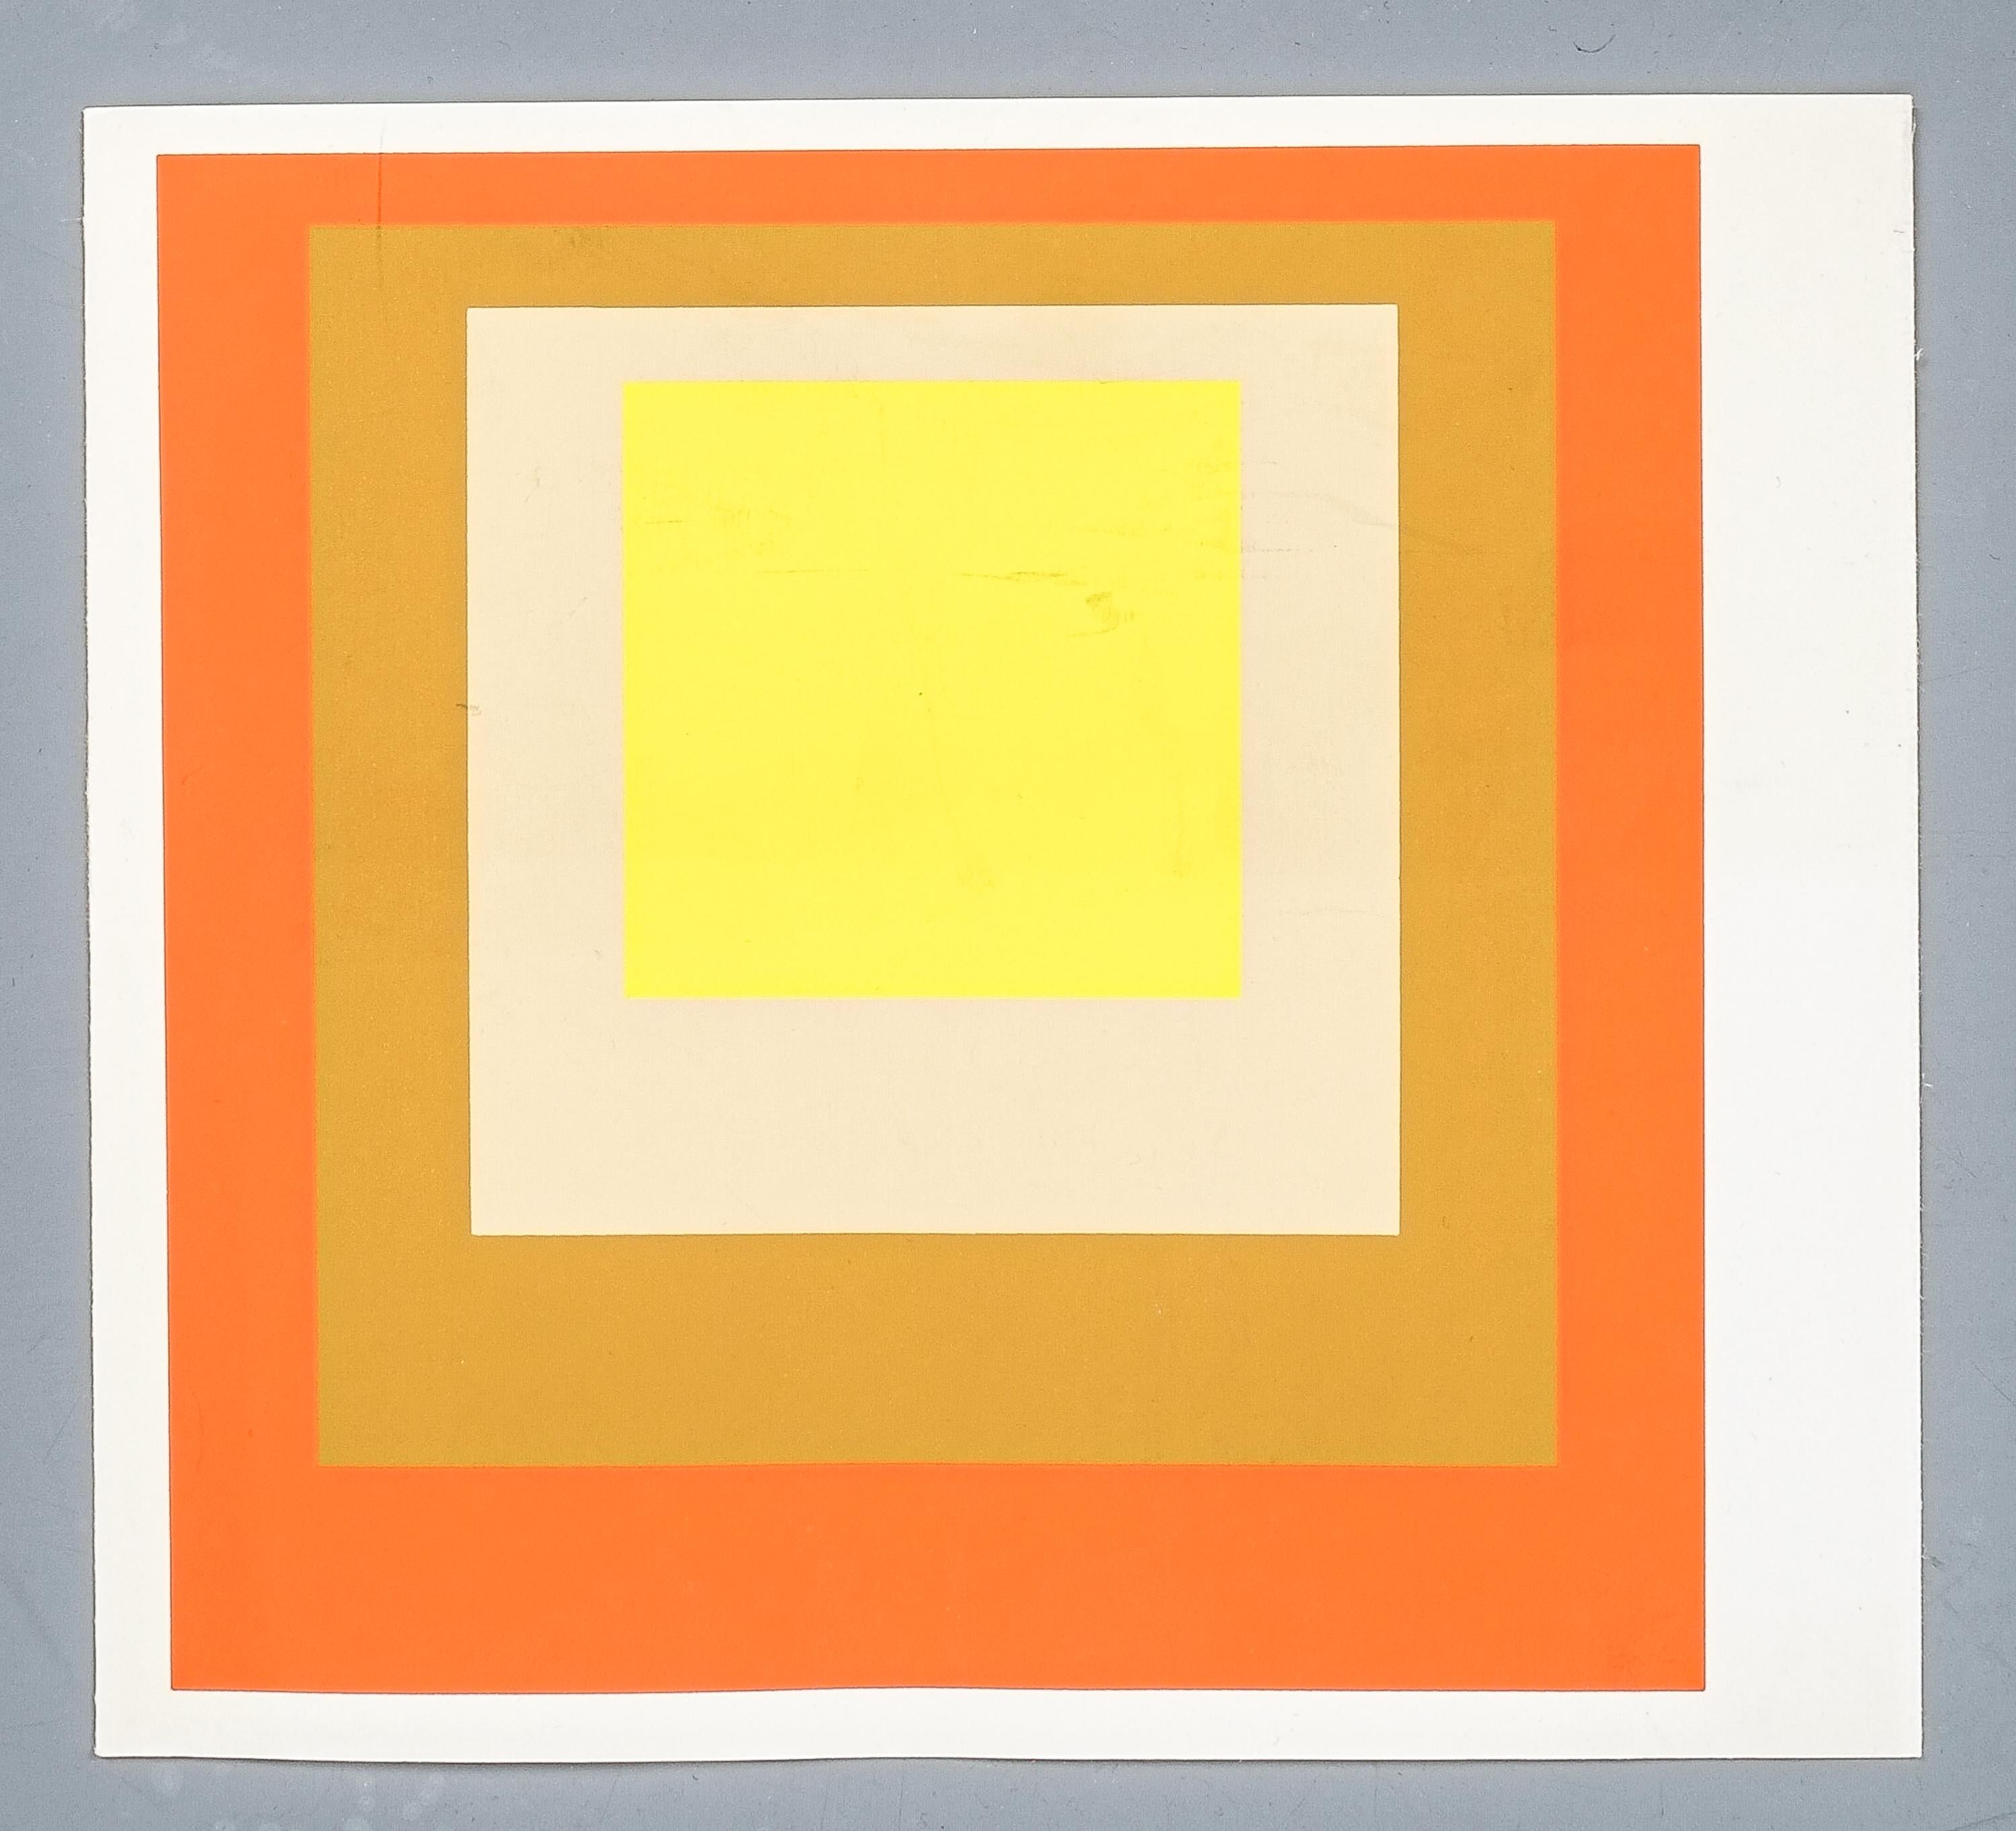 Late 20th Century 1 of 9 Screen-Prints Serigraph after Josef Albers Albers, 1977